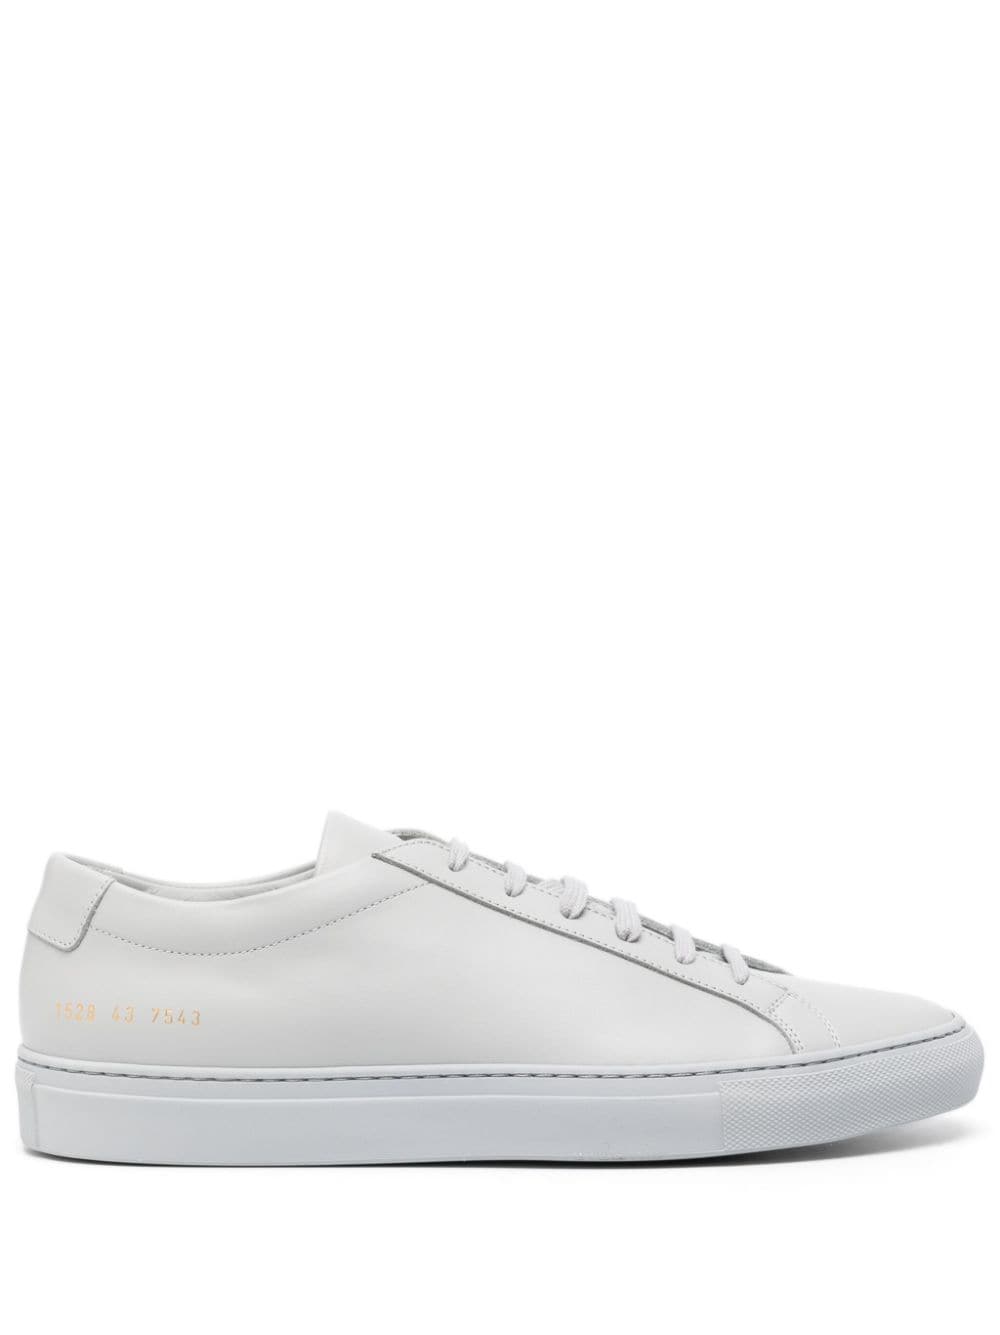 COMMON PROJECTS COMMON PROJECTS- Original Achilles Low Sneakers